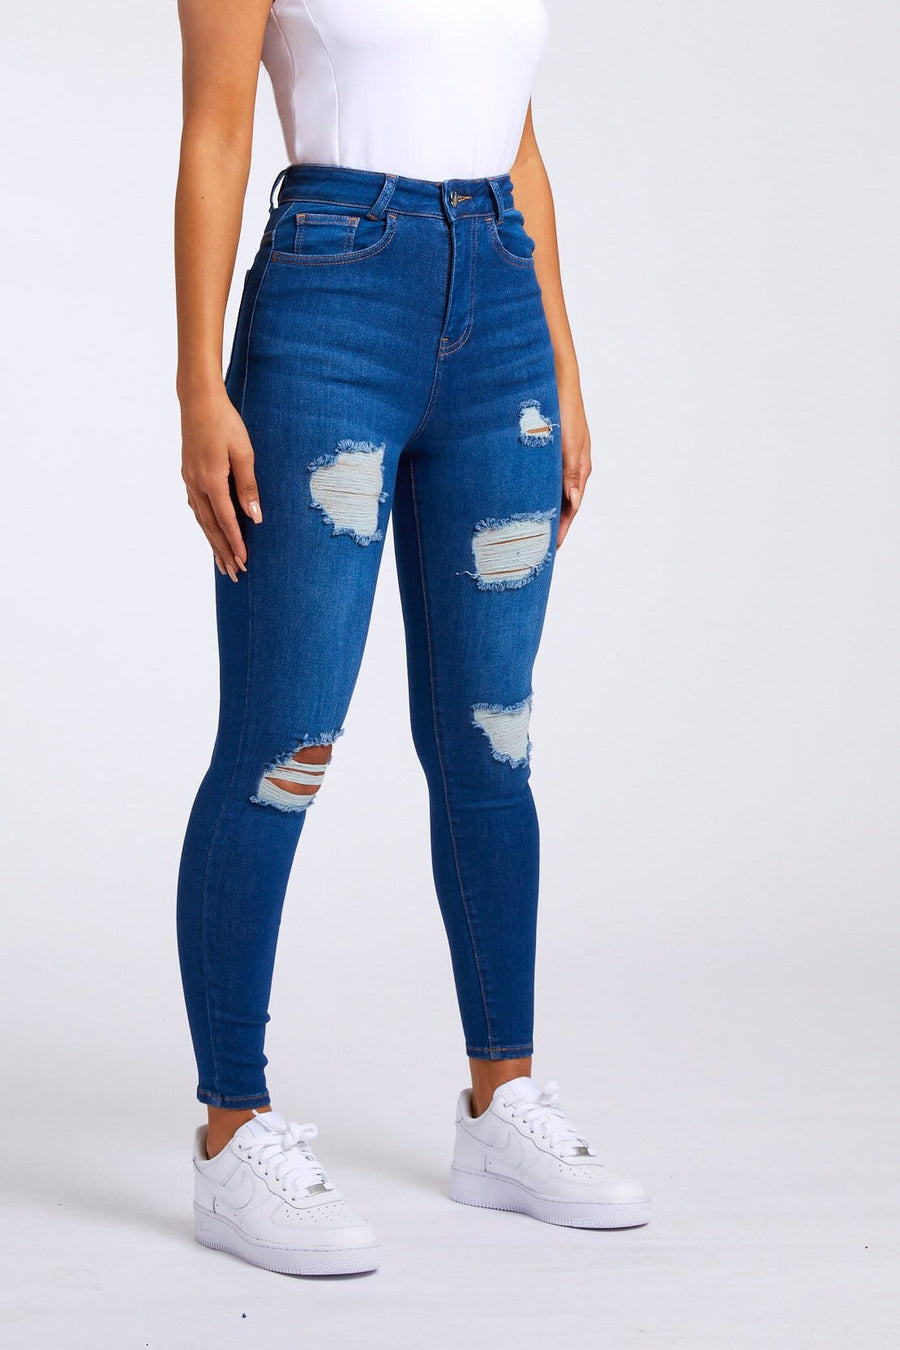 Legend London Jeans SKINNY JEANS RIPPED & REPAIRED - DARK BLUE